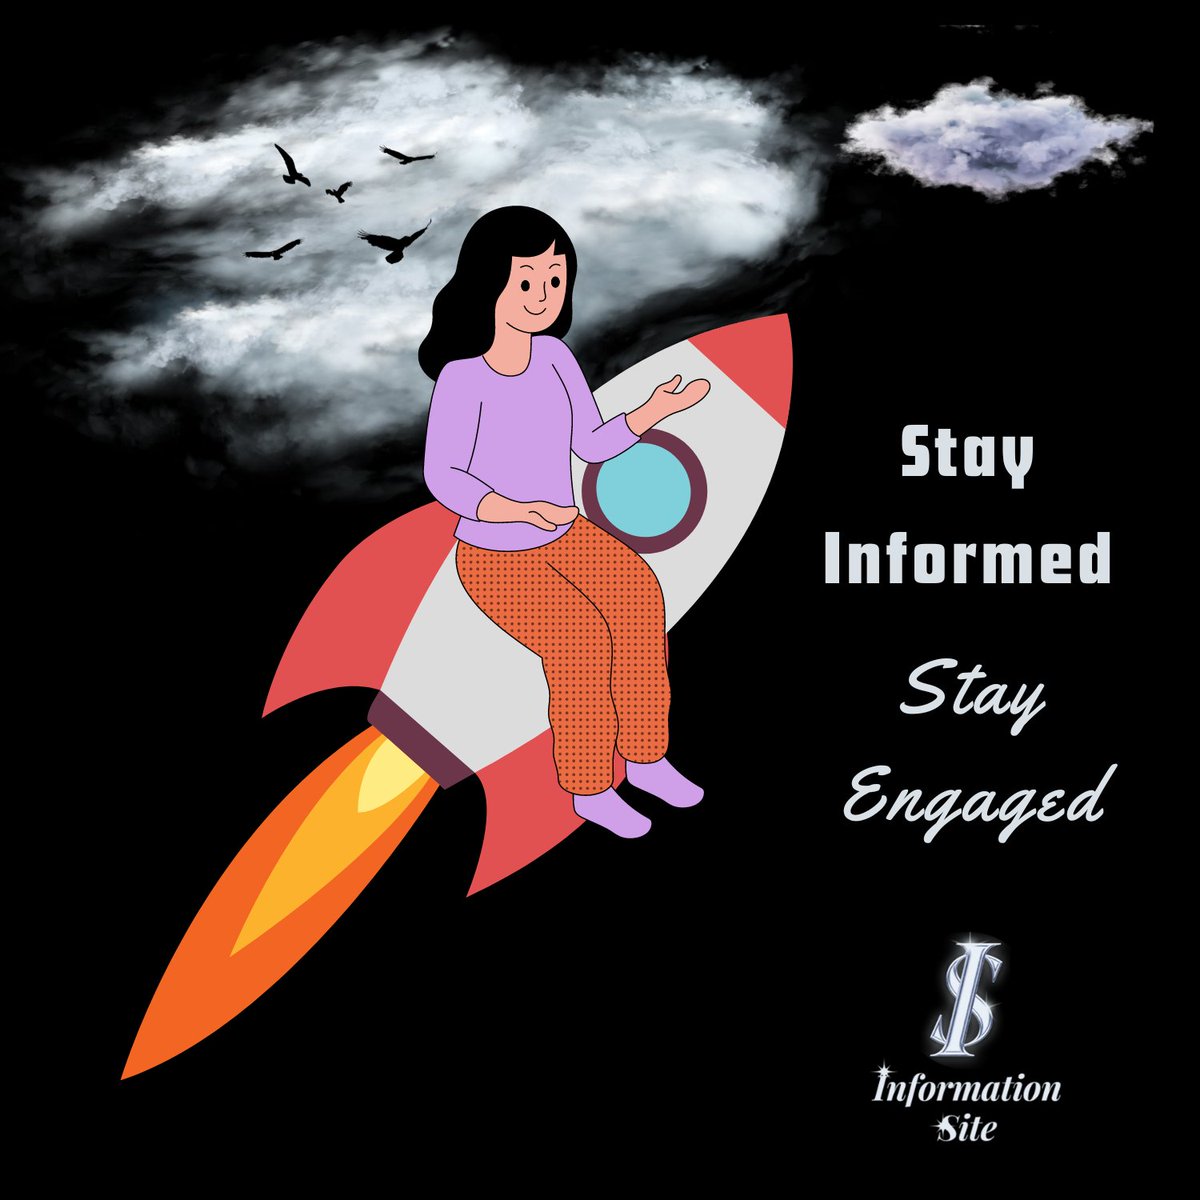 Update yourself daily with current affairs.

informationsite.in

#InformationSite
#StayInformed #information #update #UpdateNews #currentaffairs #StayEngaged